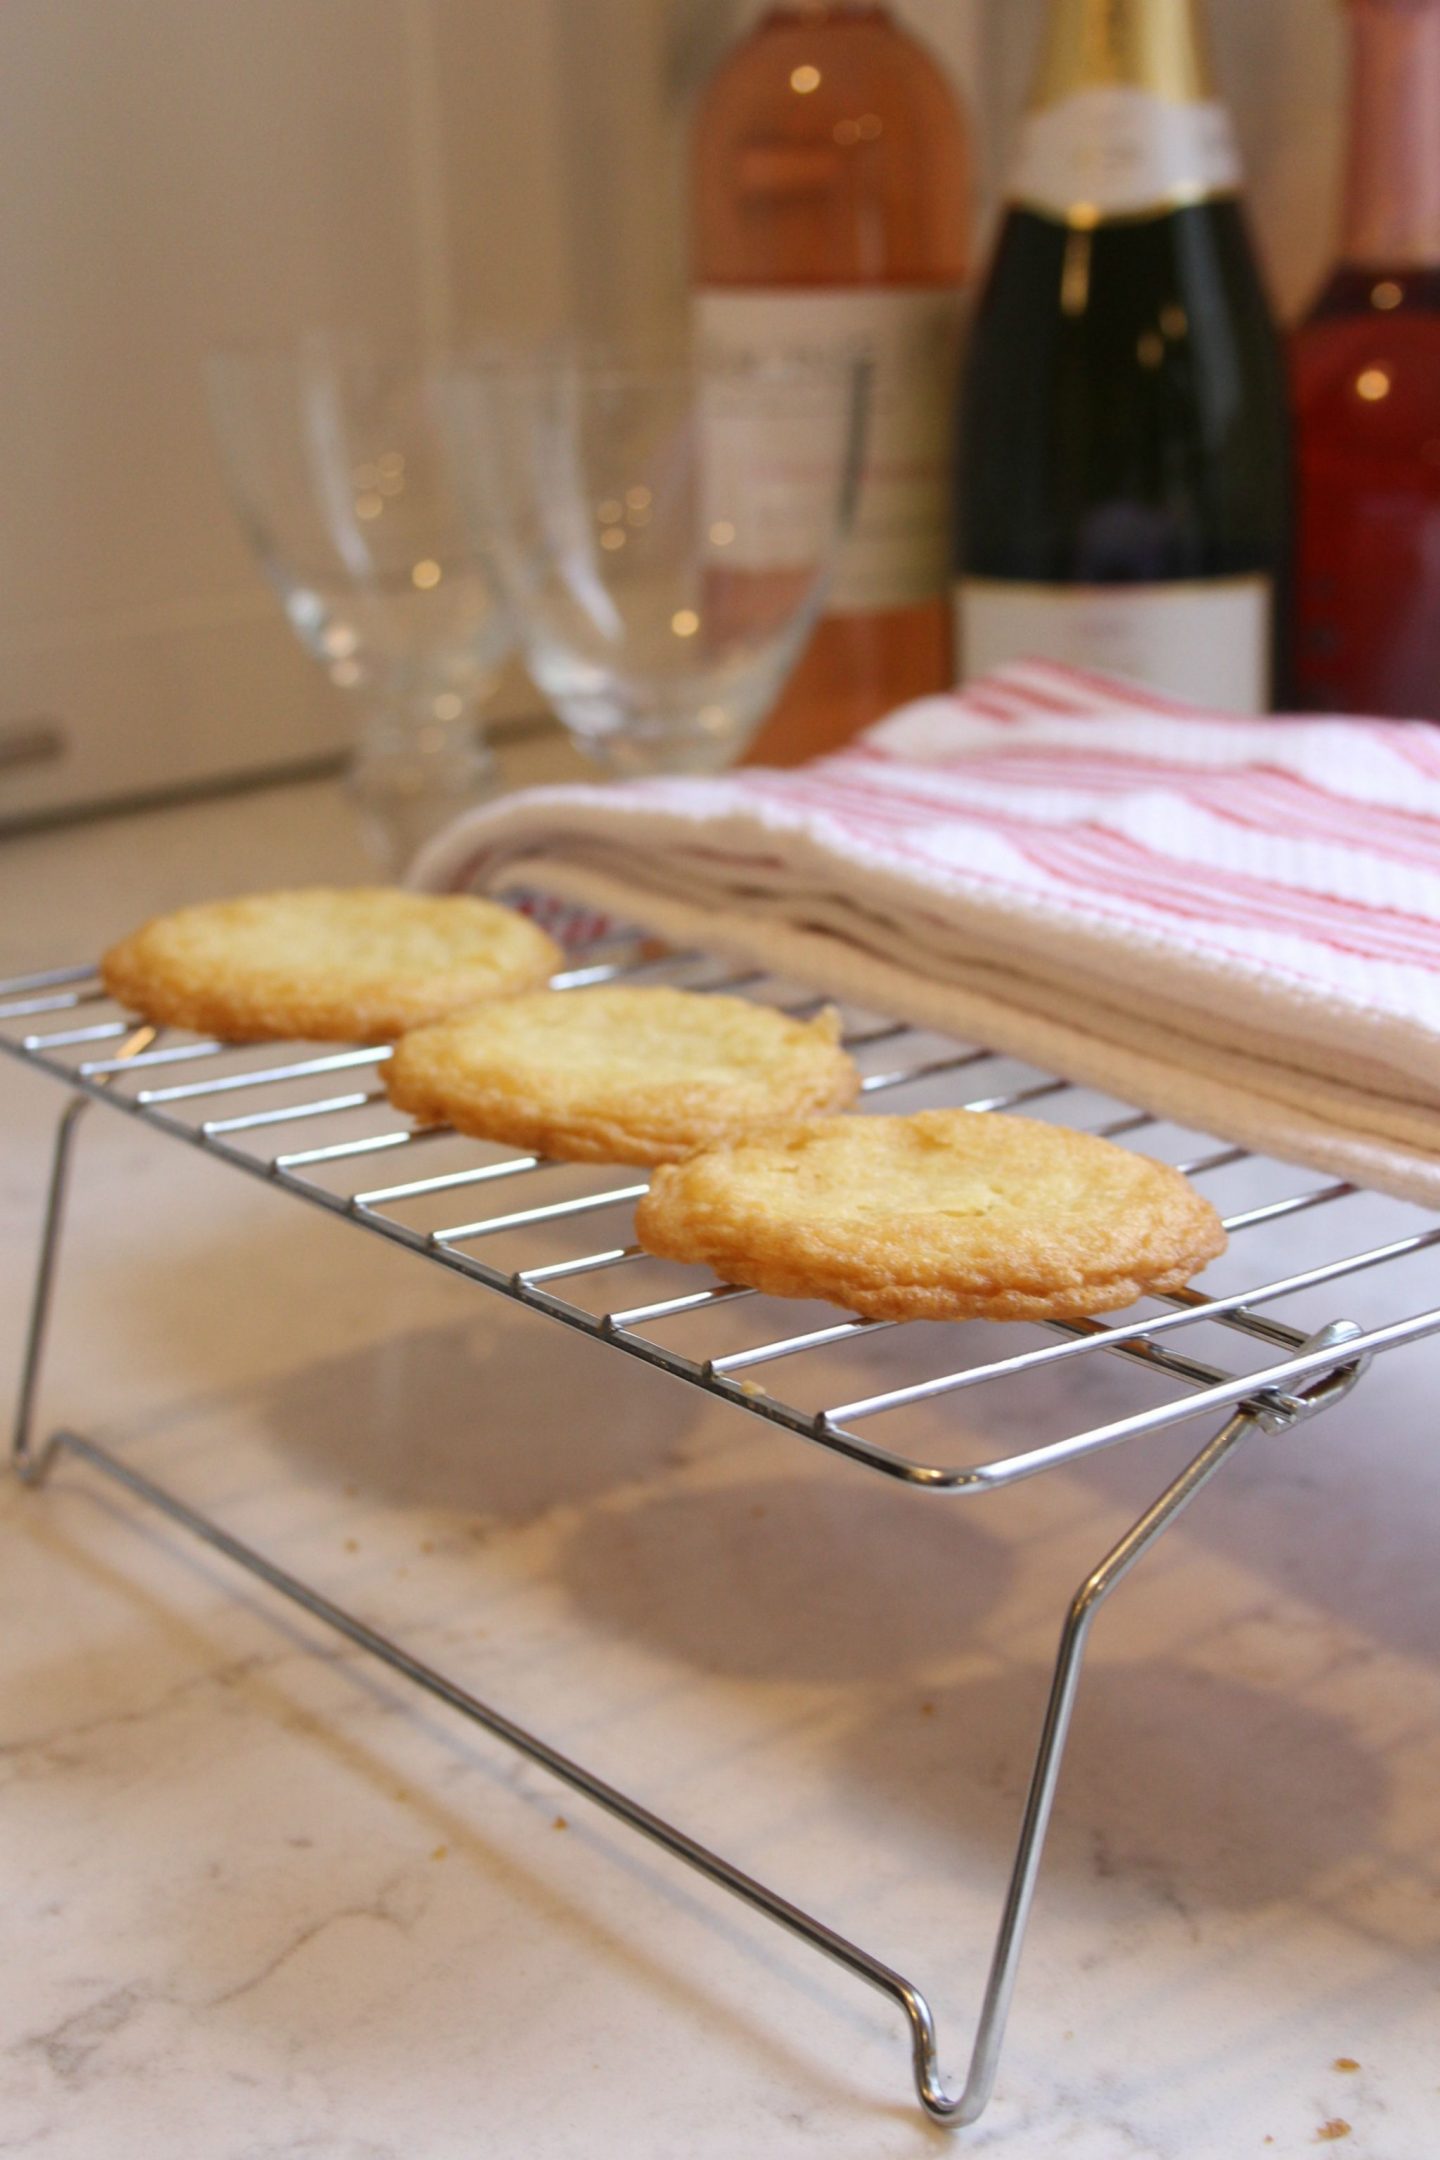 Sugar cookies cooling on wire rack by Hello Lovely Studio